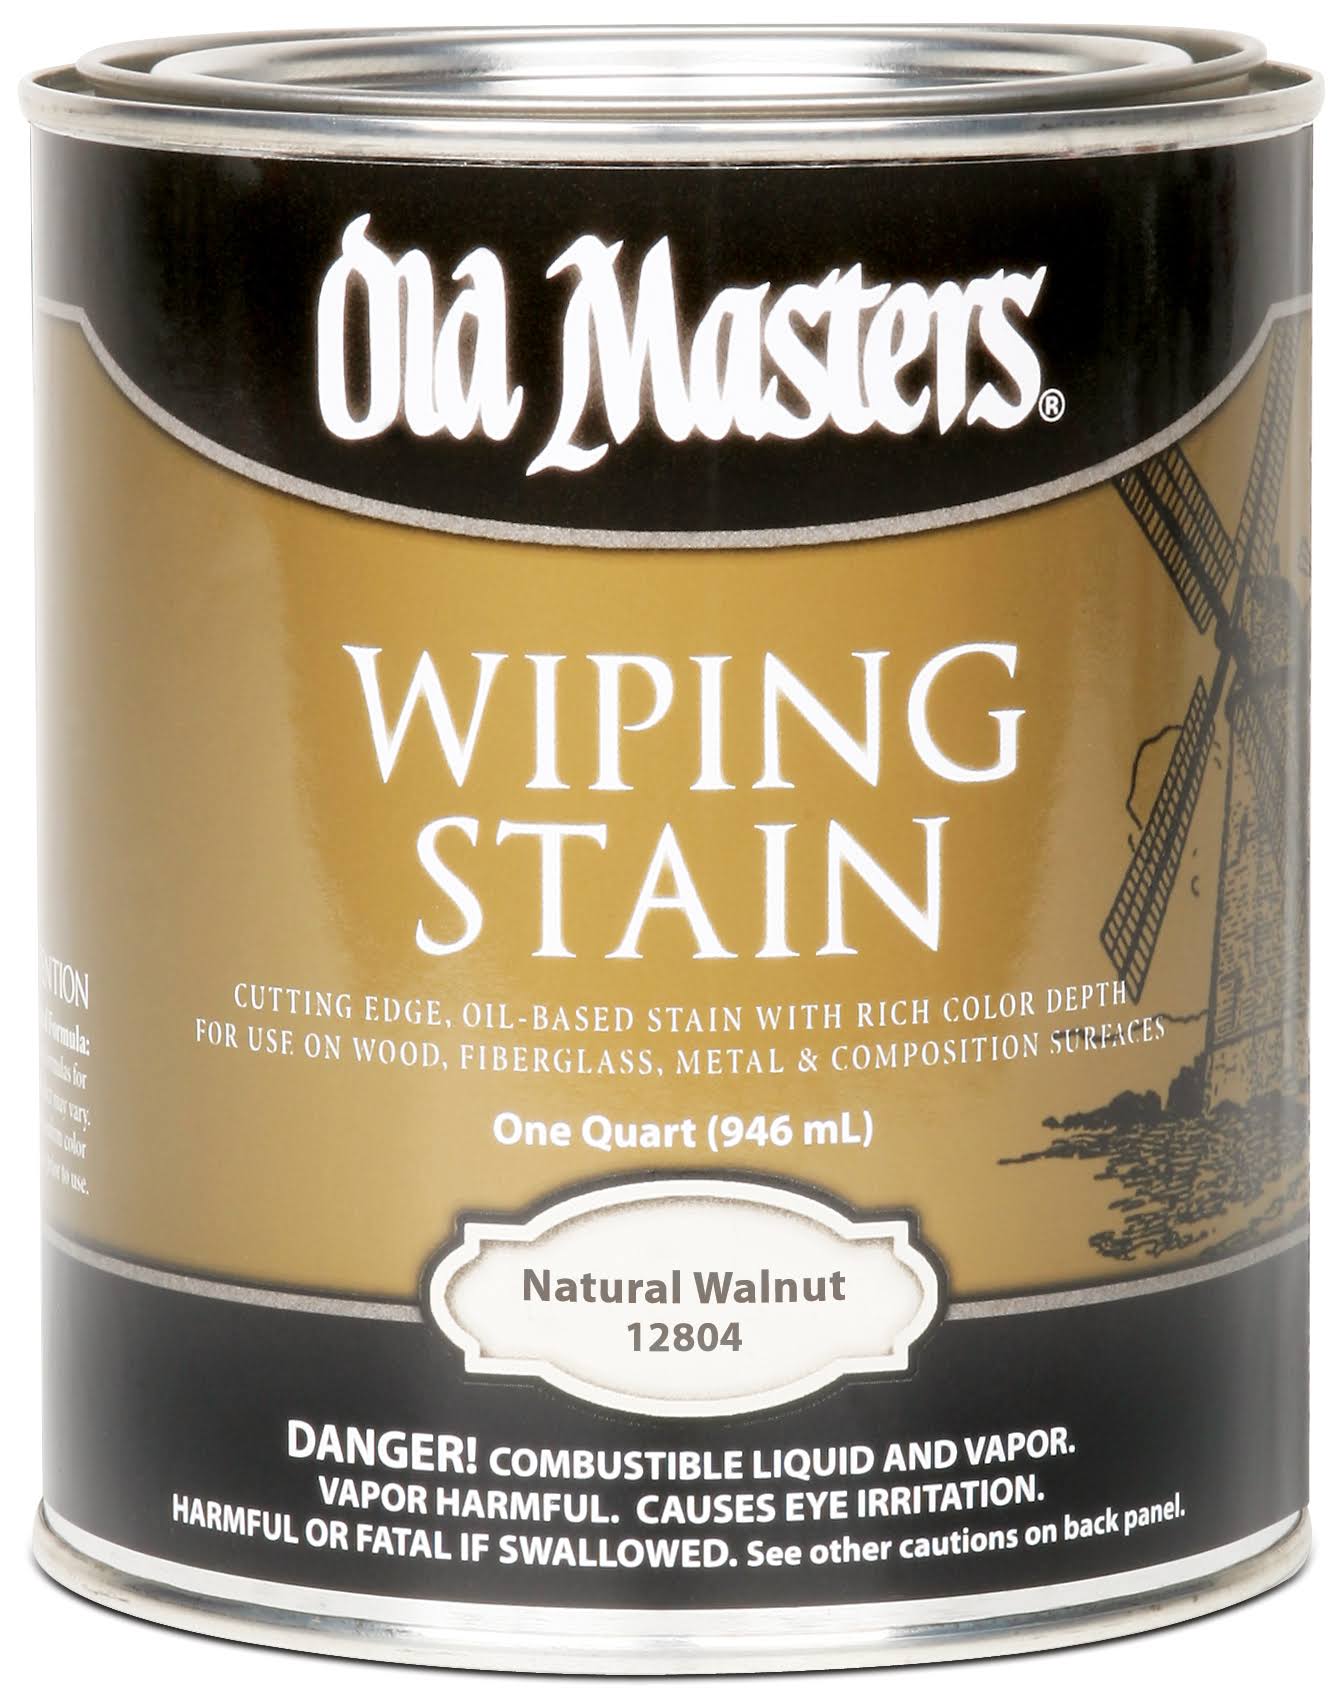 Old Masters Wiping Stain - Natural Walnut, 946ml